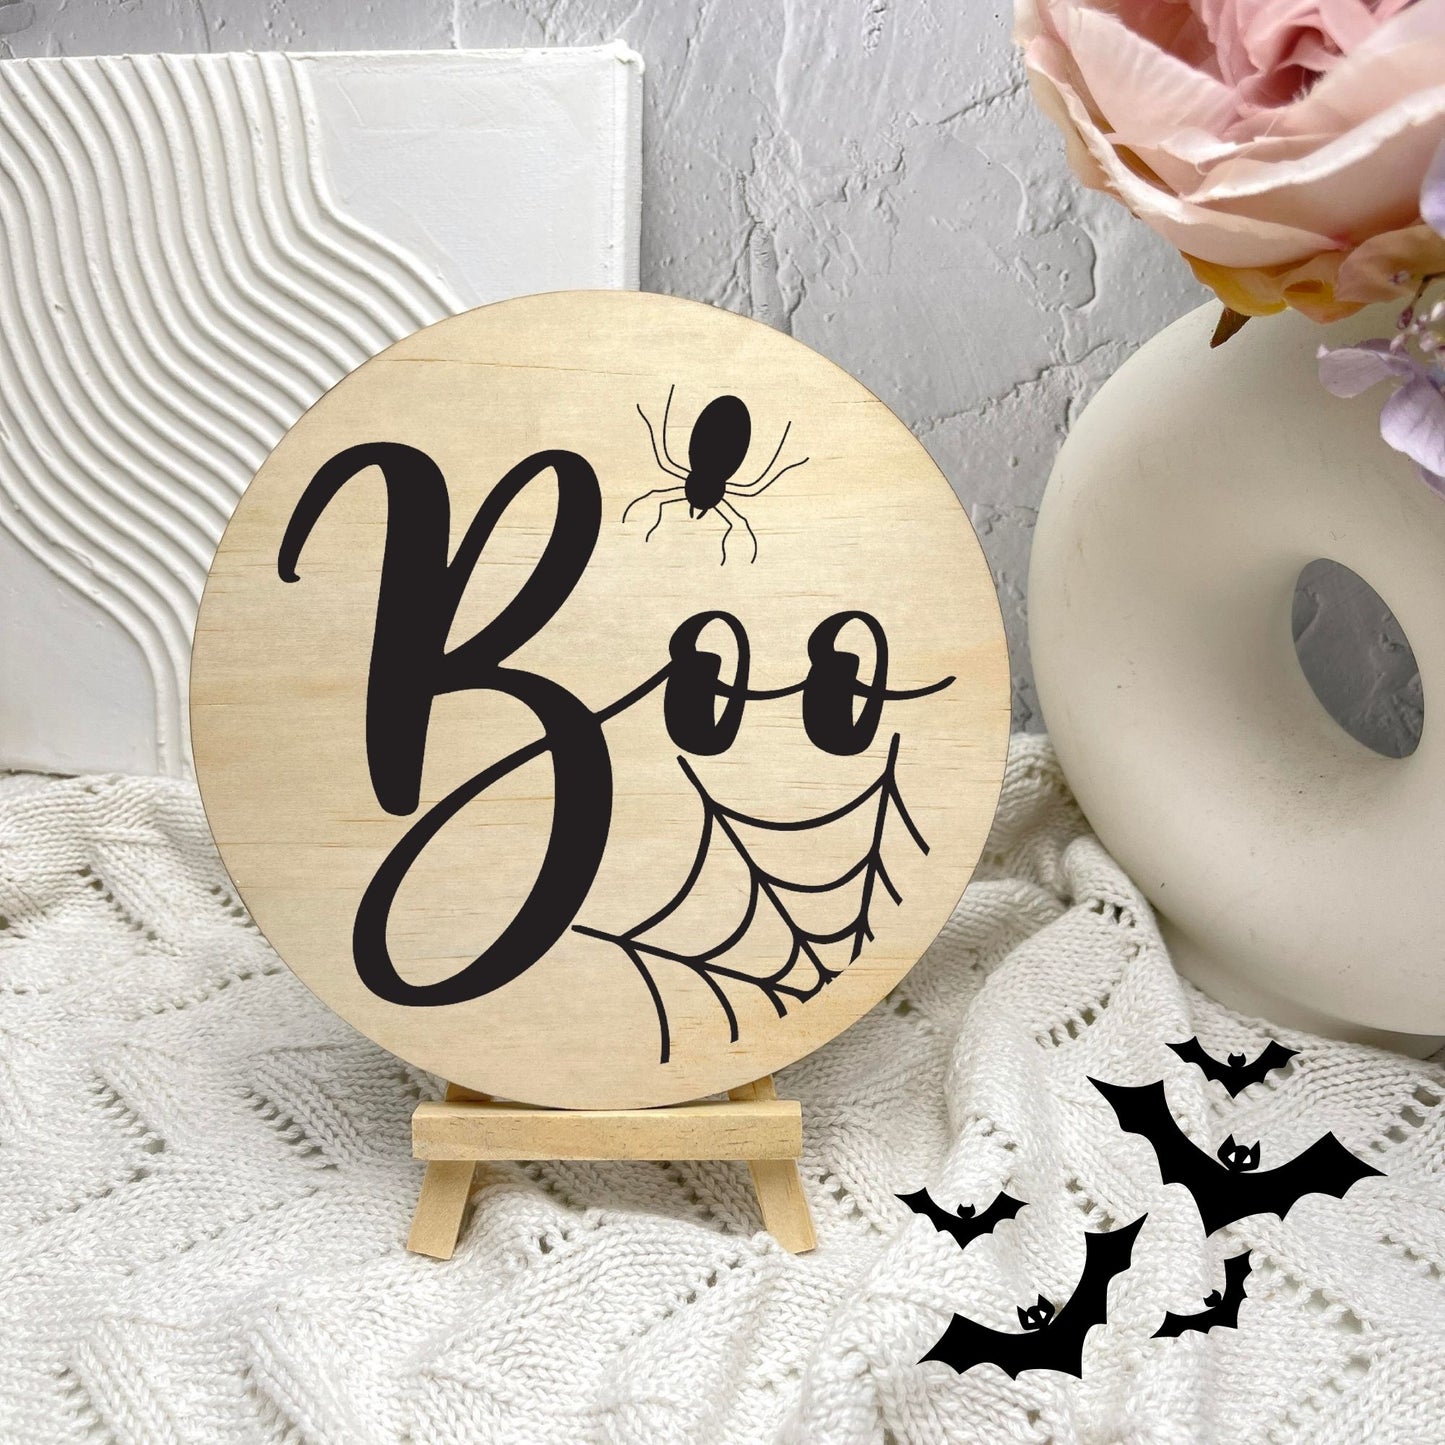 Boo! sign, Halloween Decor, Spooky Vibes, hocus pocus sign, trick or treat decor, haunted house h24